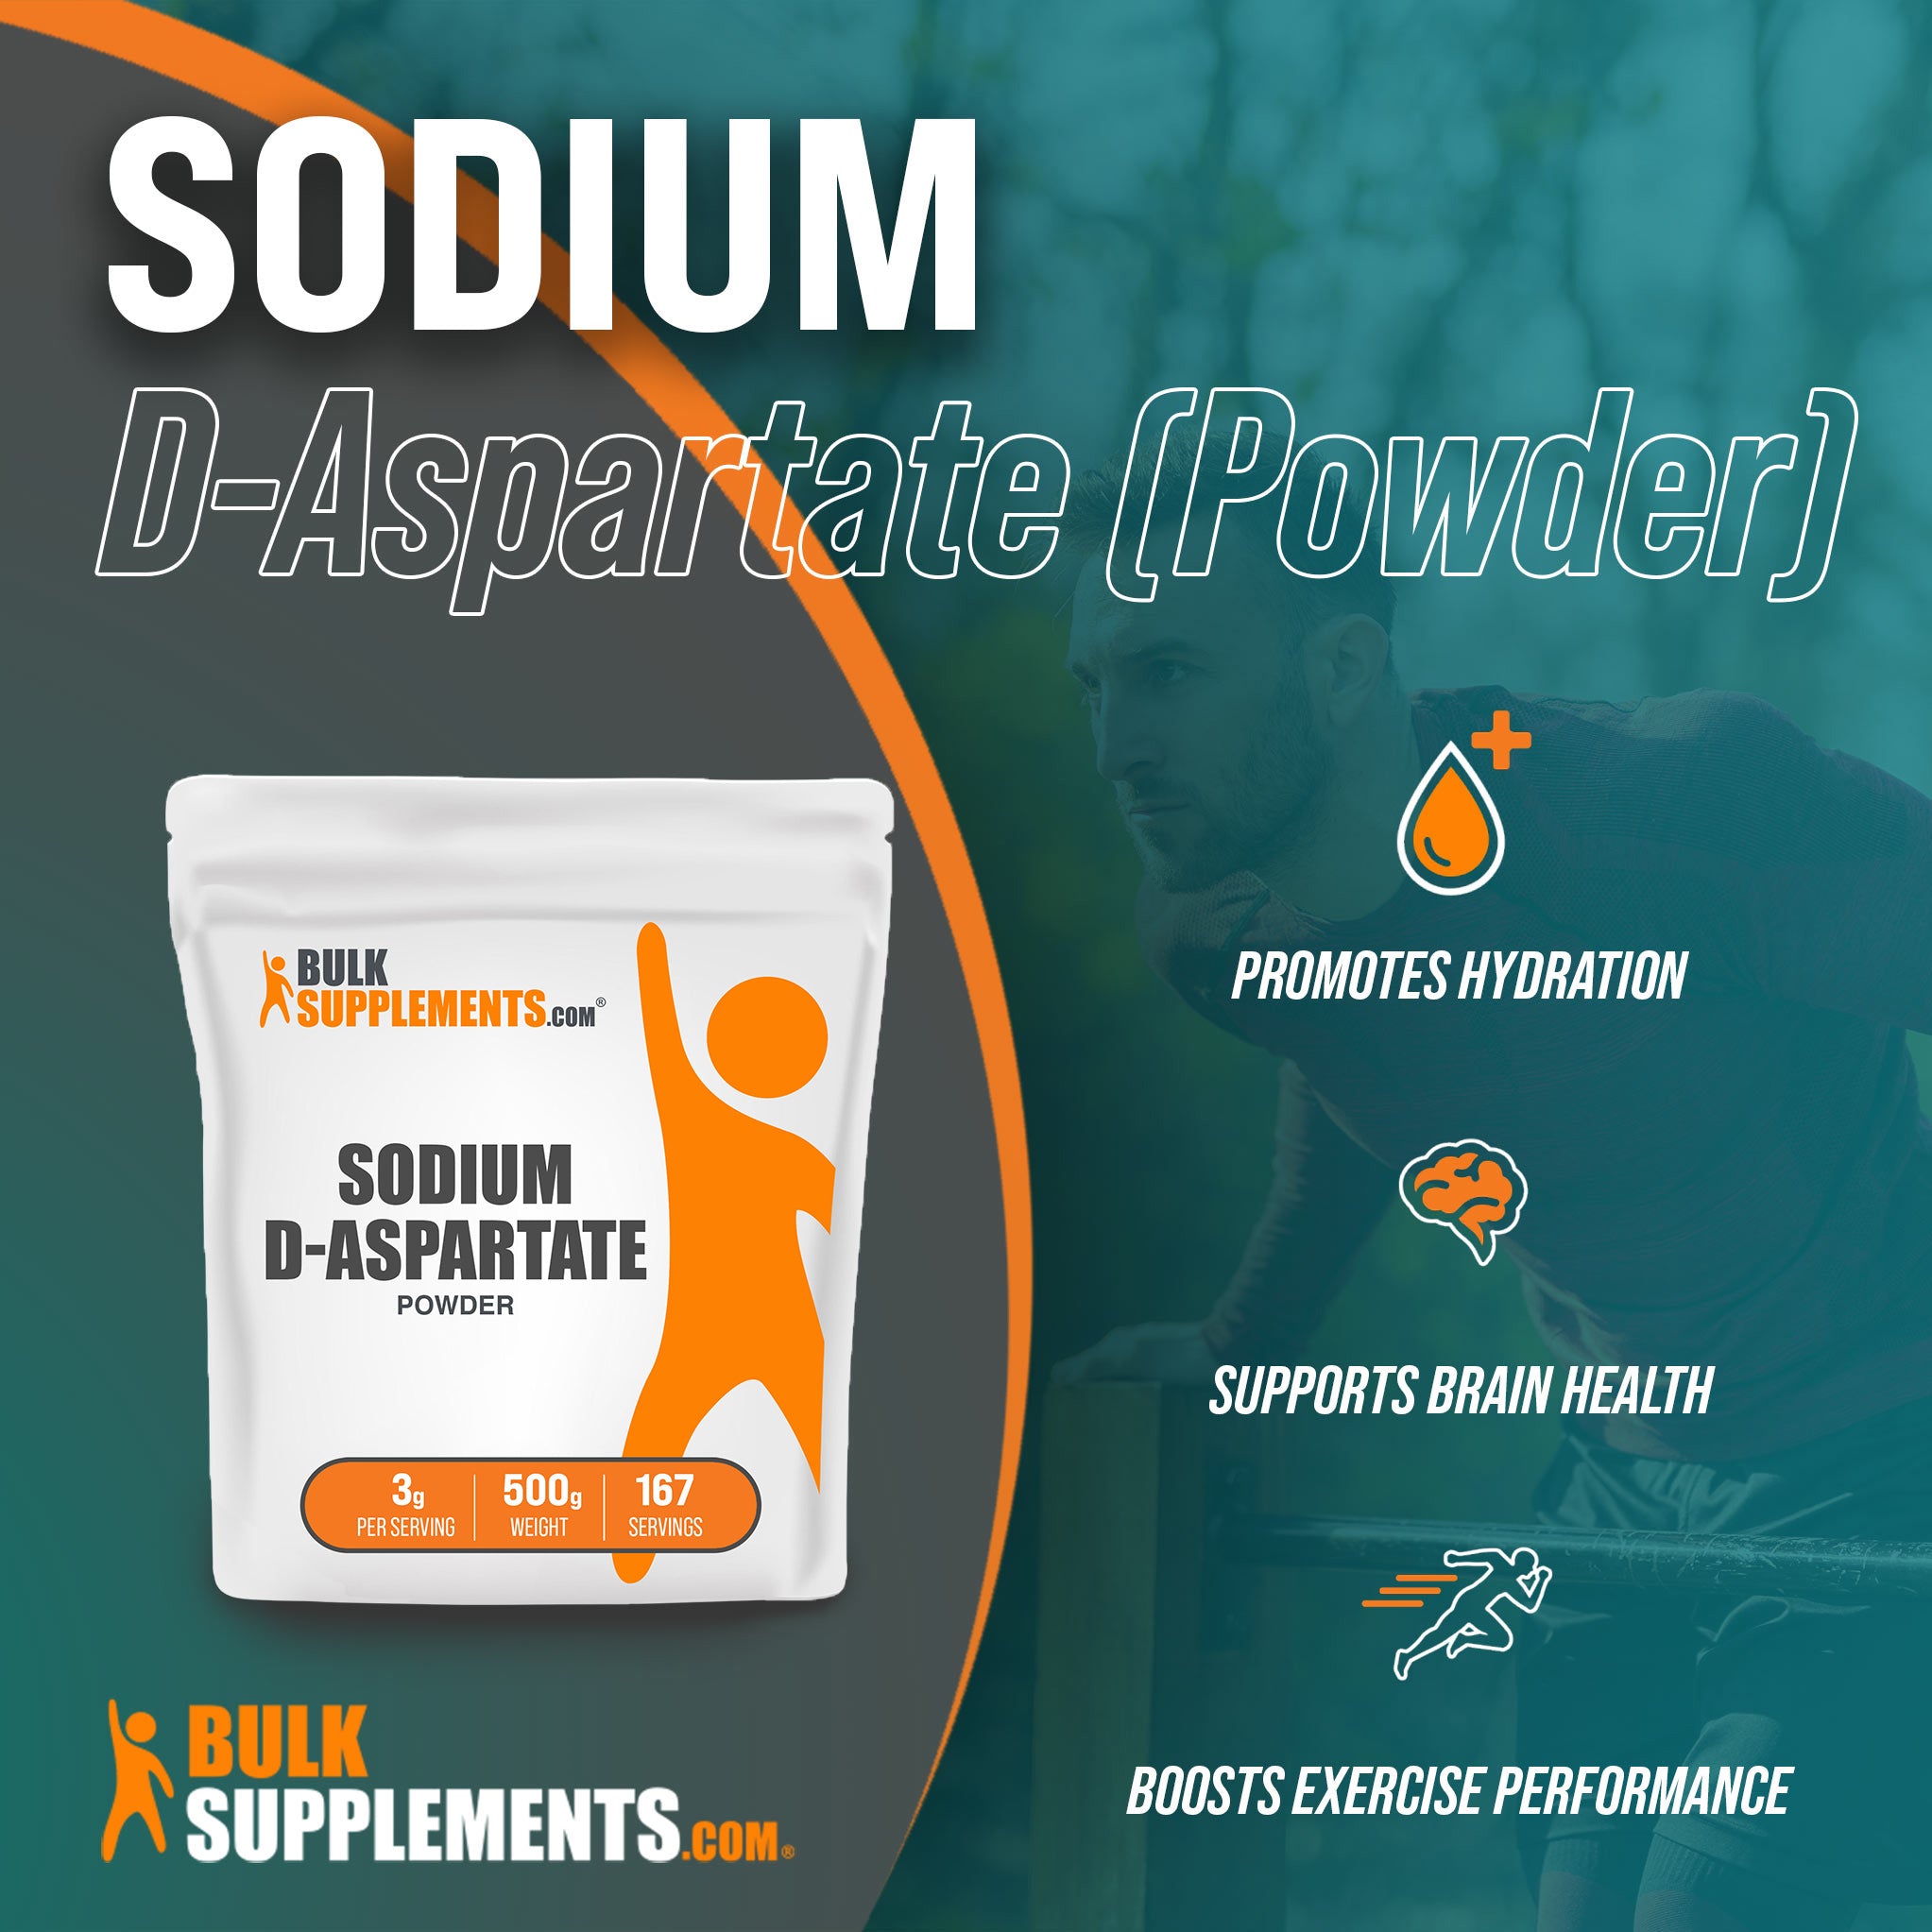 Benefits of Sodium D-Aspartate: promotes hydration, supports brain health, boosts exercise performance